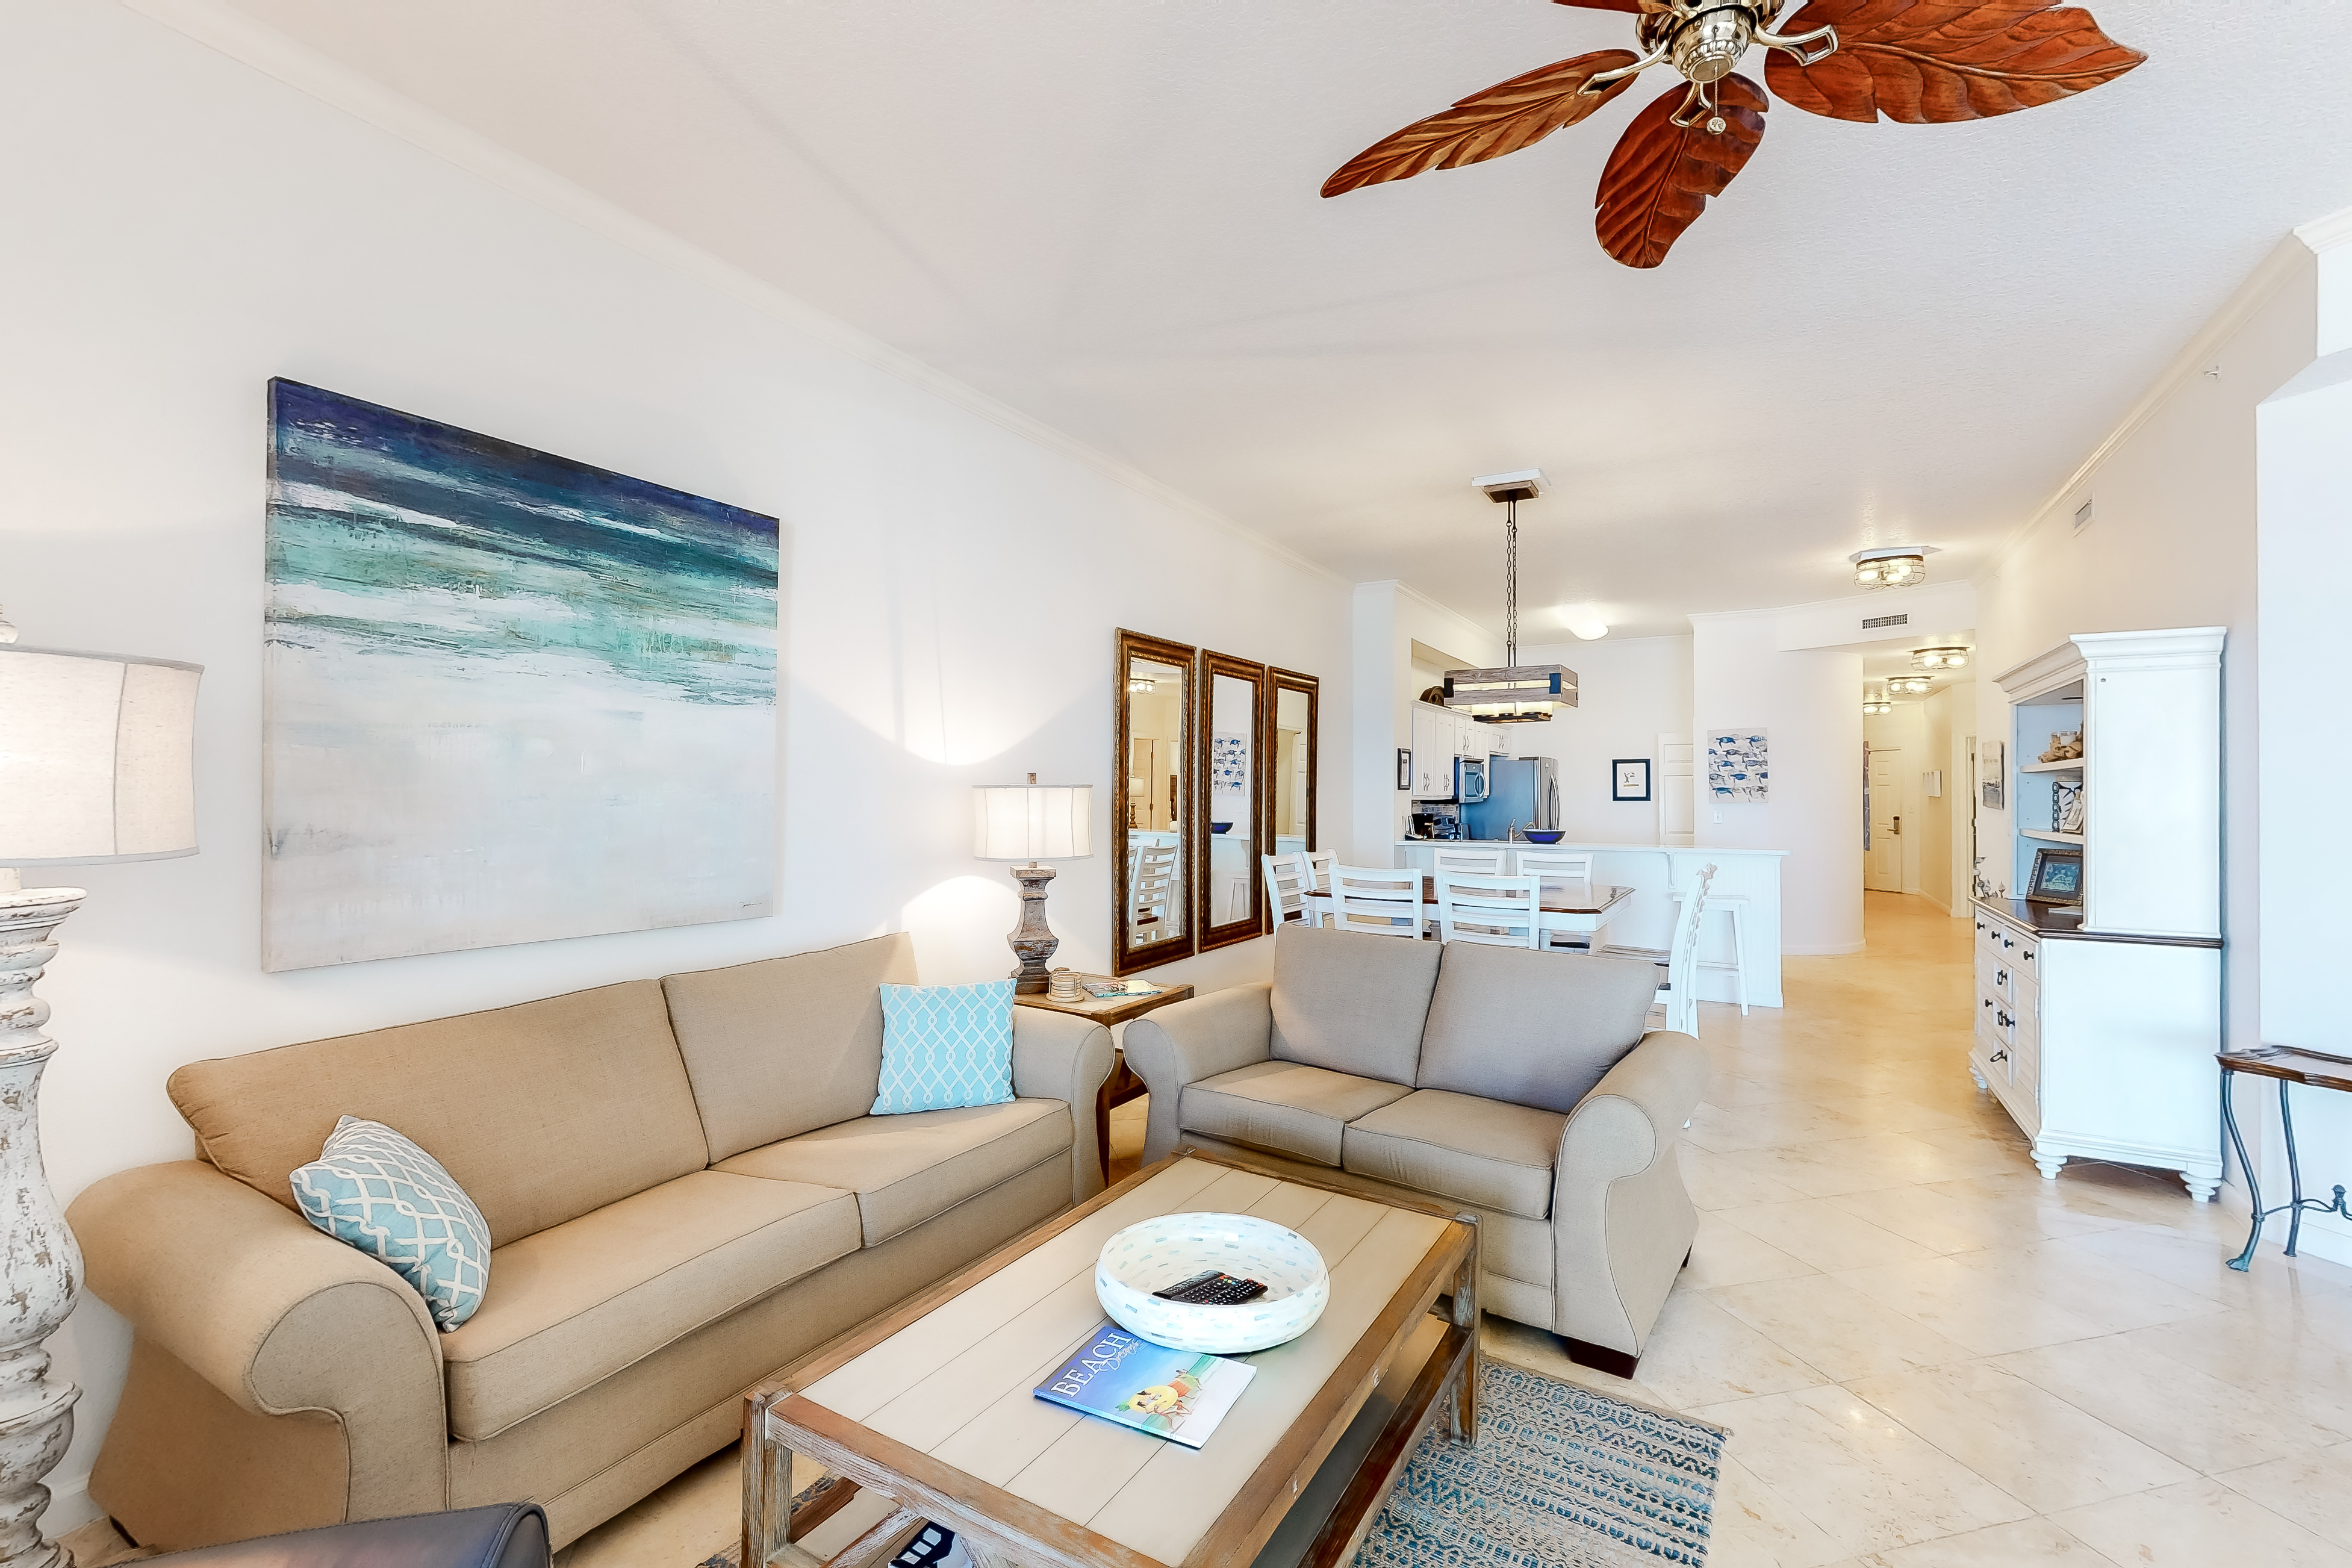 Dunes of Seagrove A408 Condo rental in Dunes of Seagrove in Highway 30-A Florida - #4